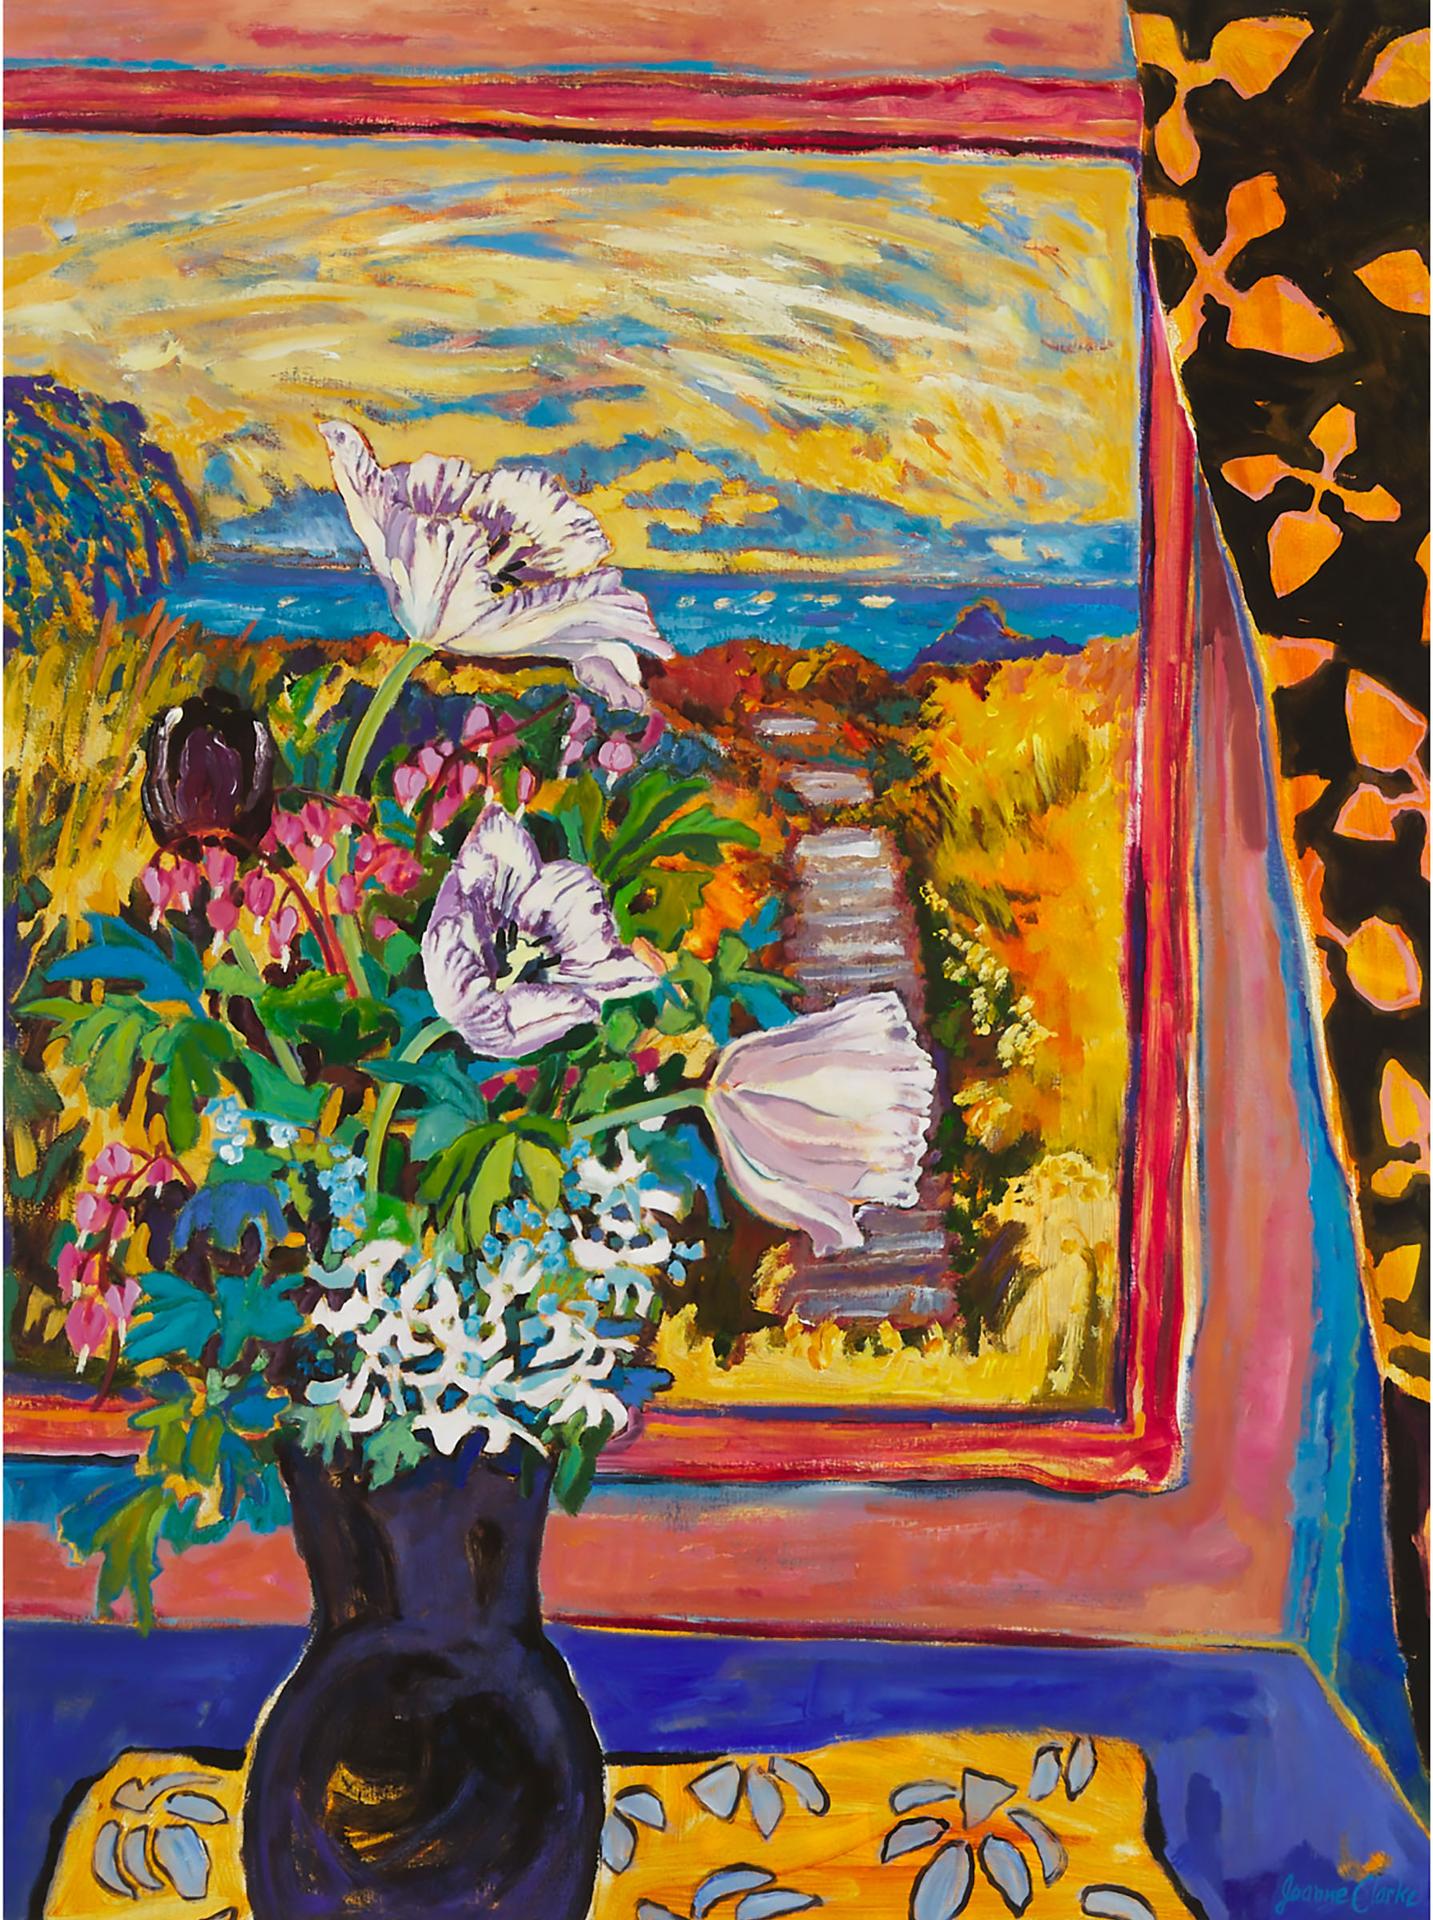 Joanne Clarke (1944) - Spring Bouquet With Painting, 1993